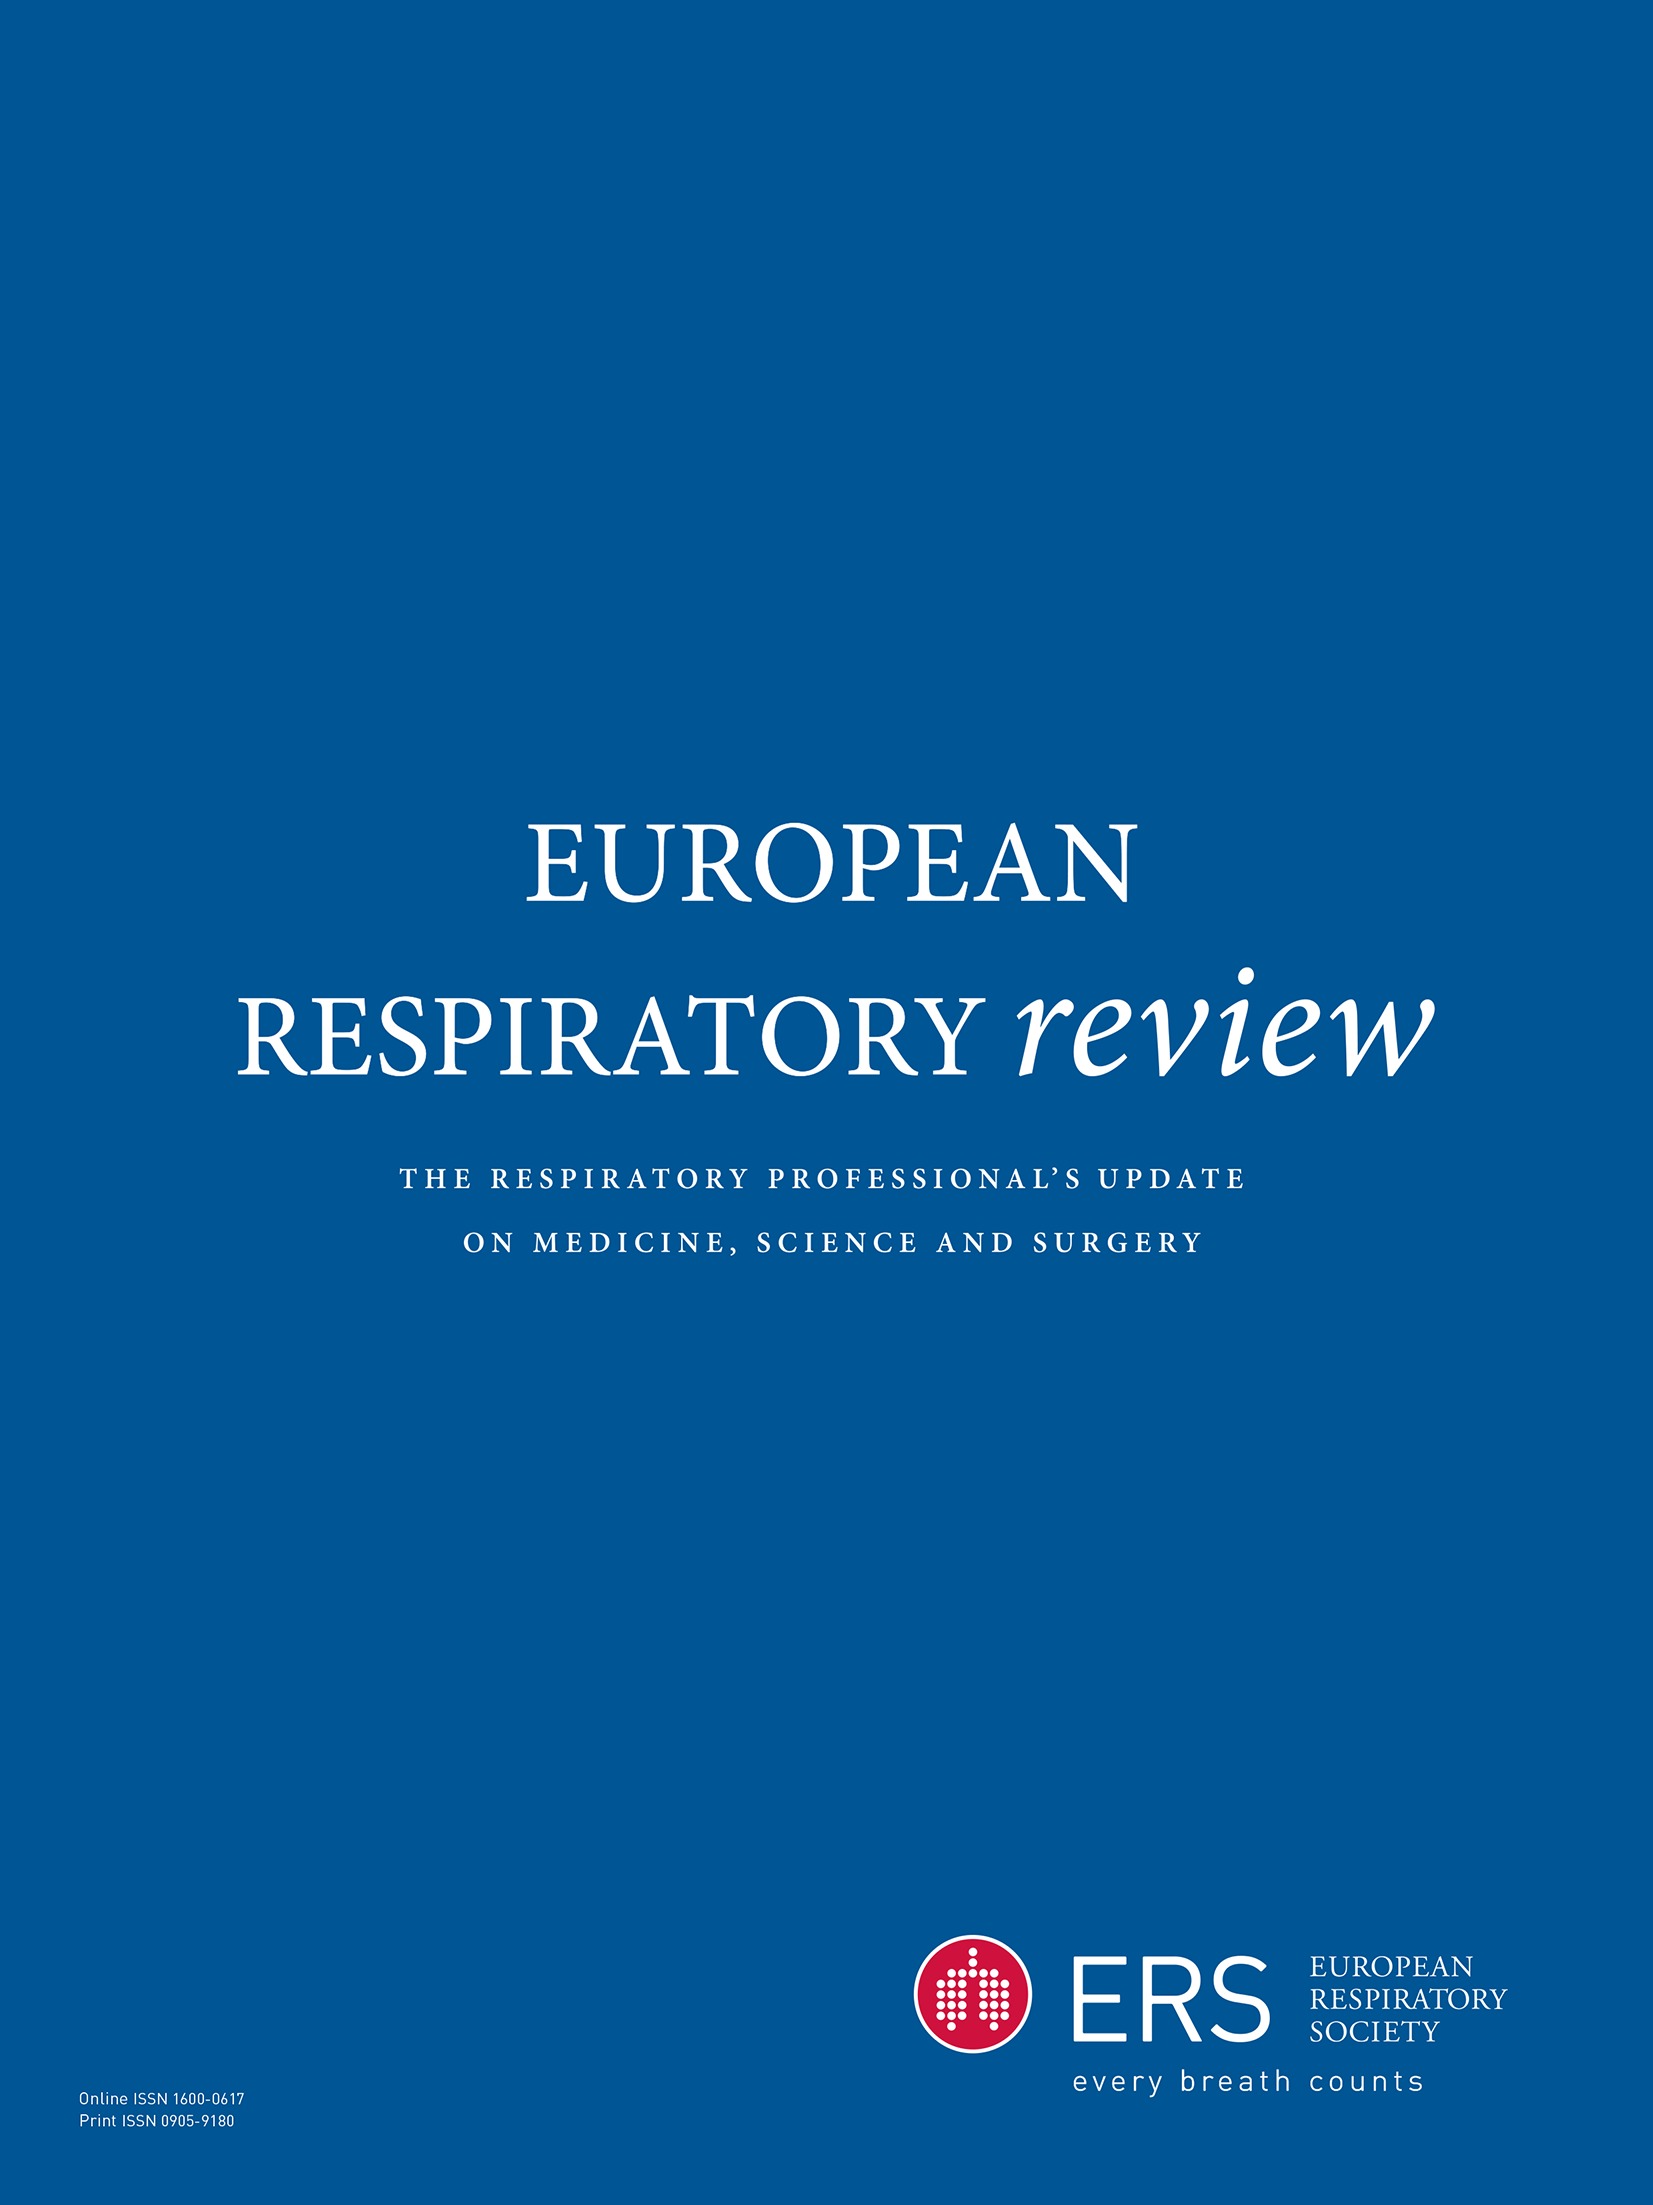 The effects of COVID-19 on respiratory muscle performance: making the case for respiratory muscle testing and training